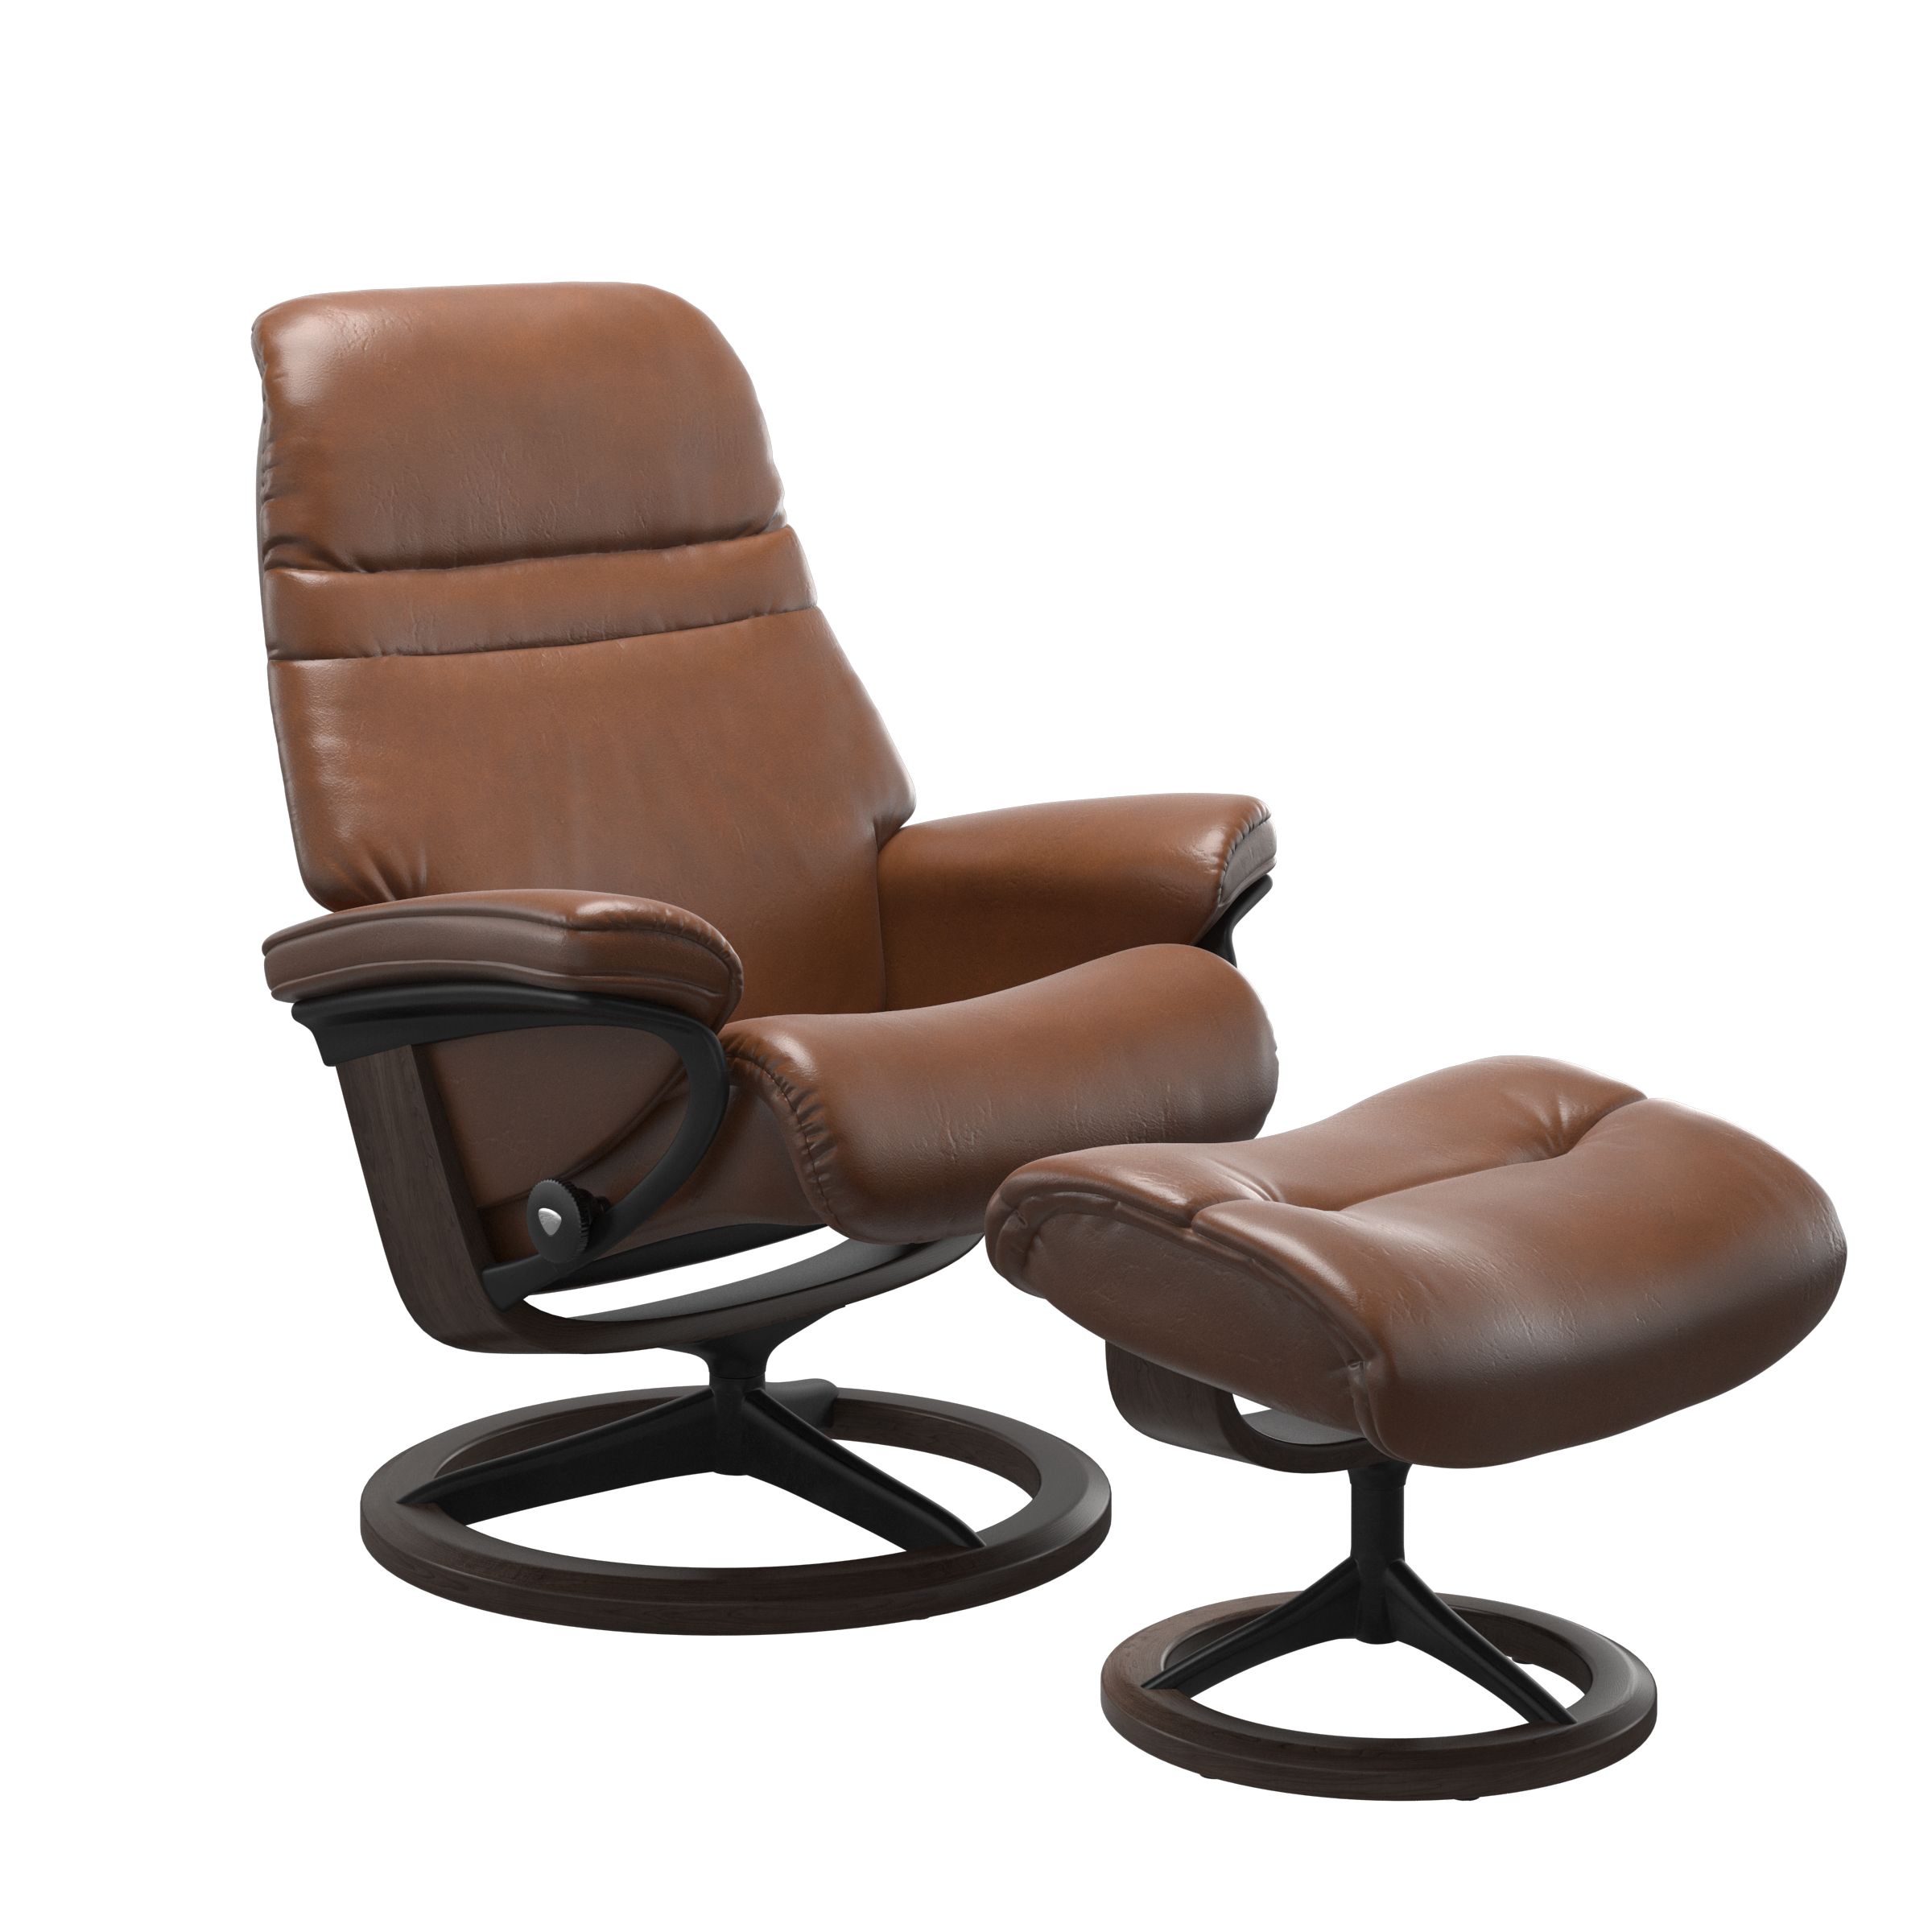 Stressless Sunrise Large Recliner and Ottoman with Signature Base